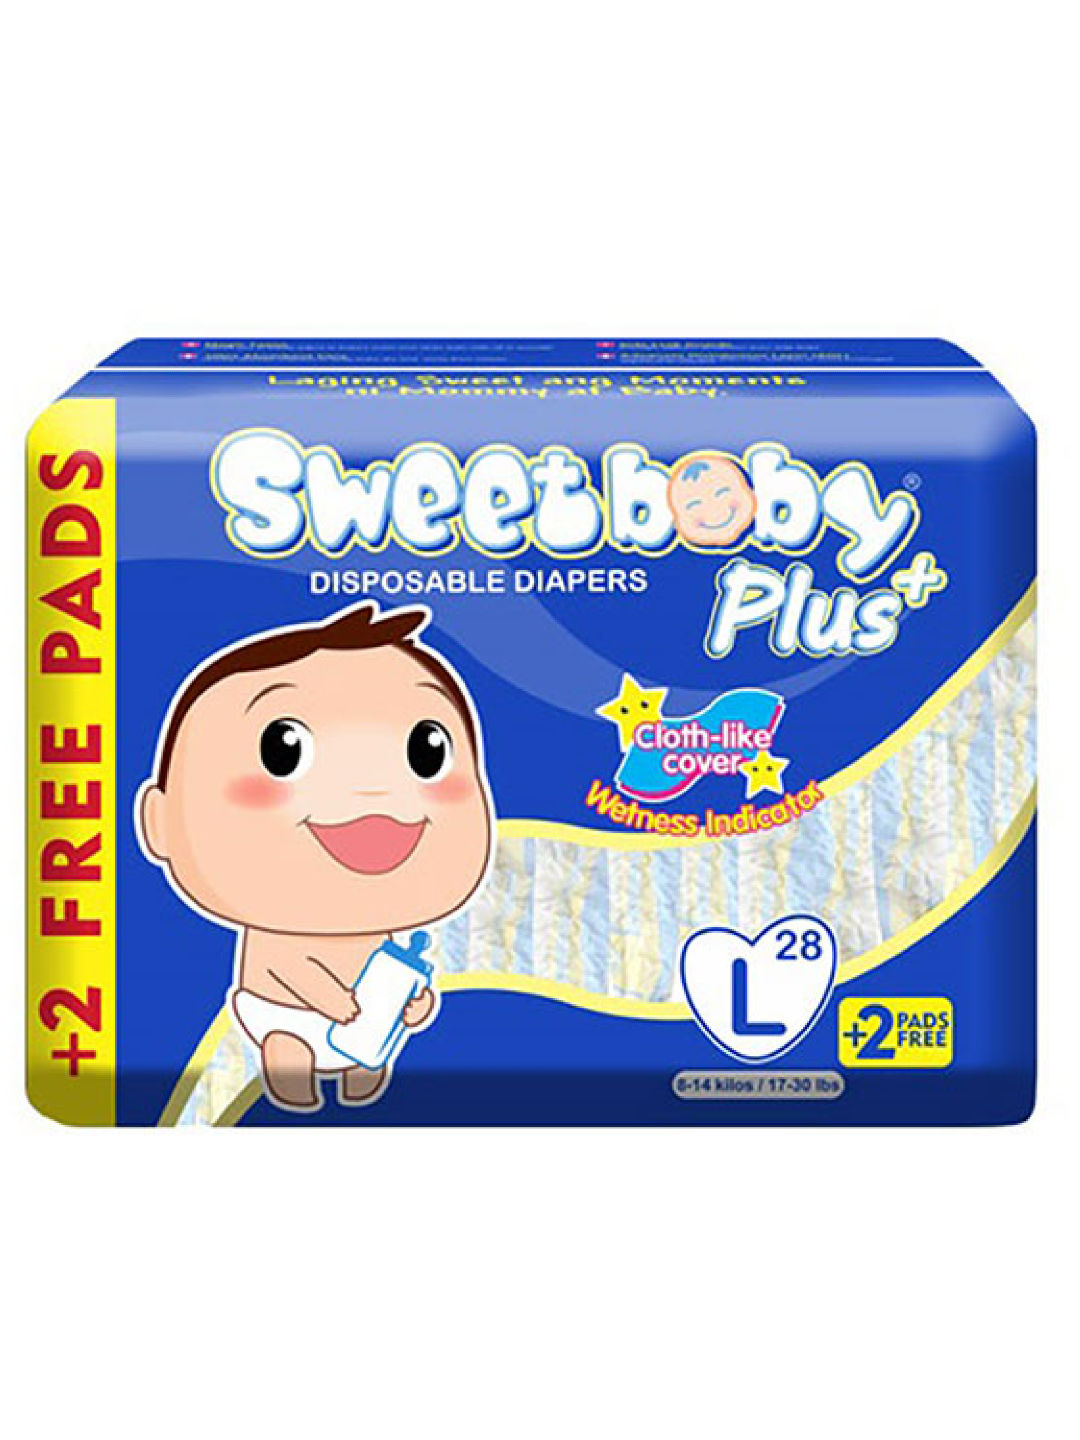 Sweetbaby Plus Disposable Diapers Large Big Pack (28s)